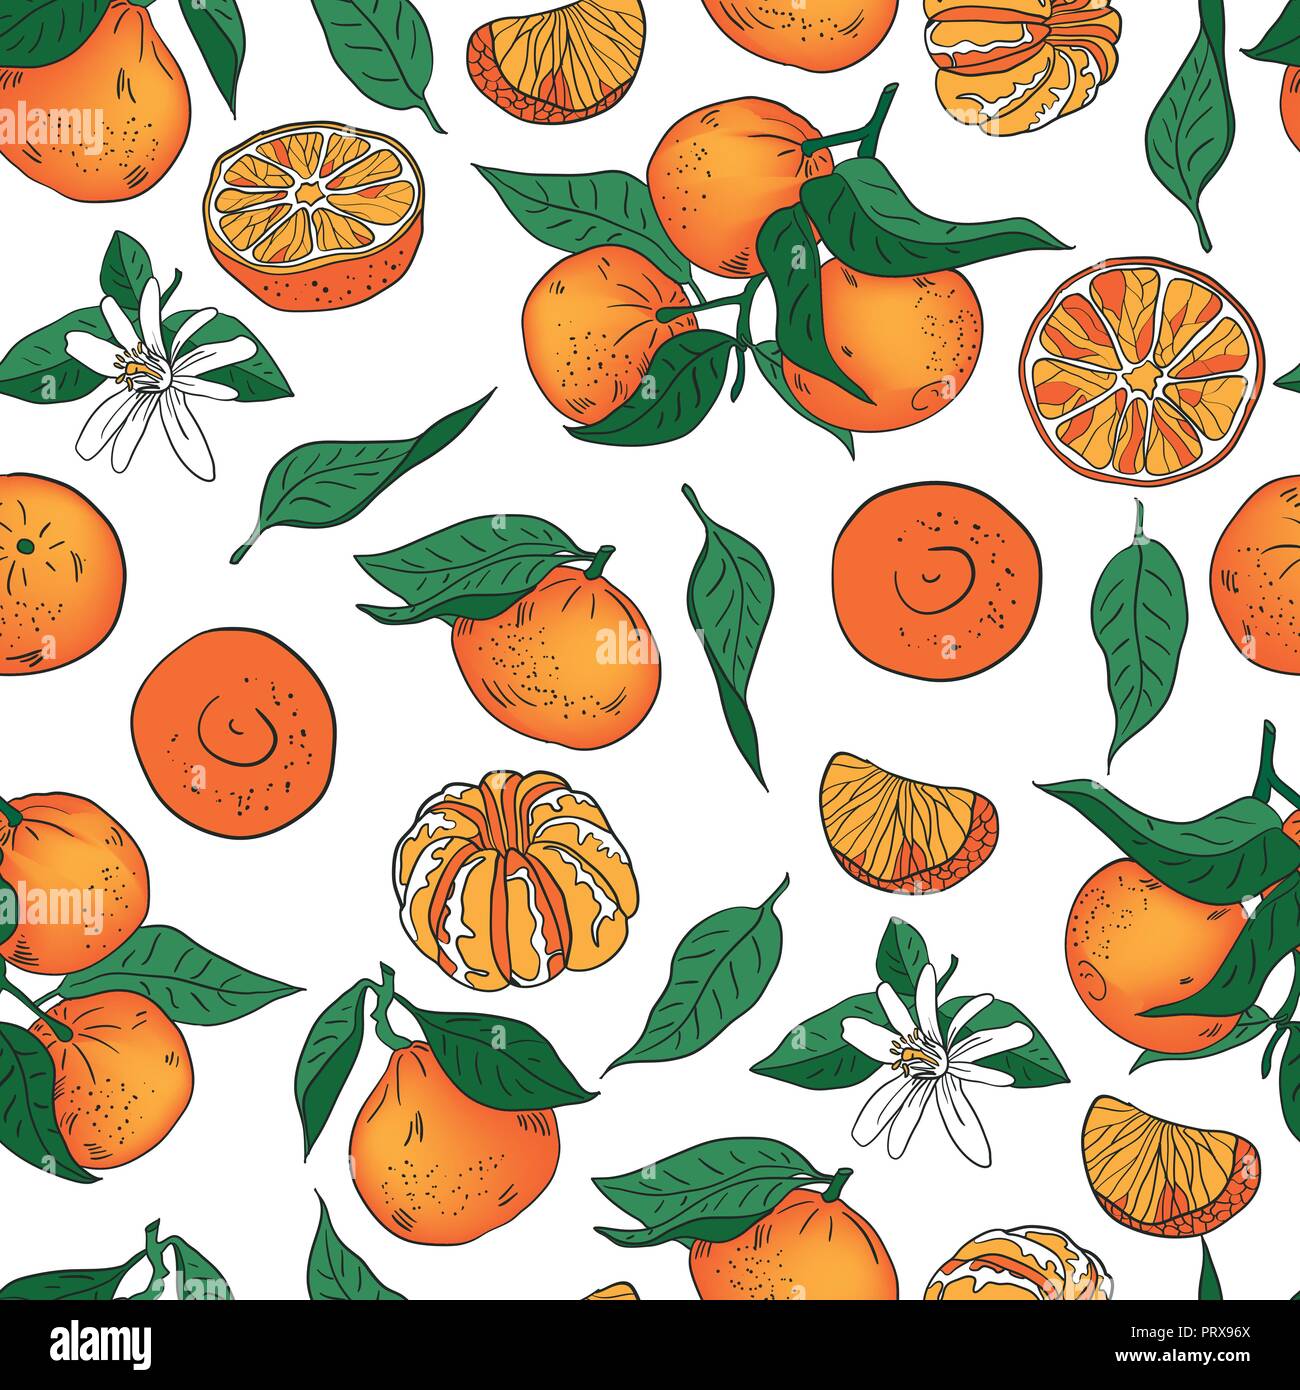 Seamless orange mandarin tangerine with leaves vector pattern. Colorful background Stock Vector